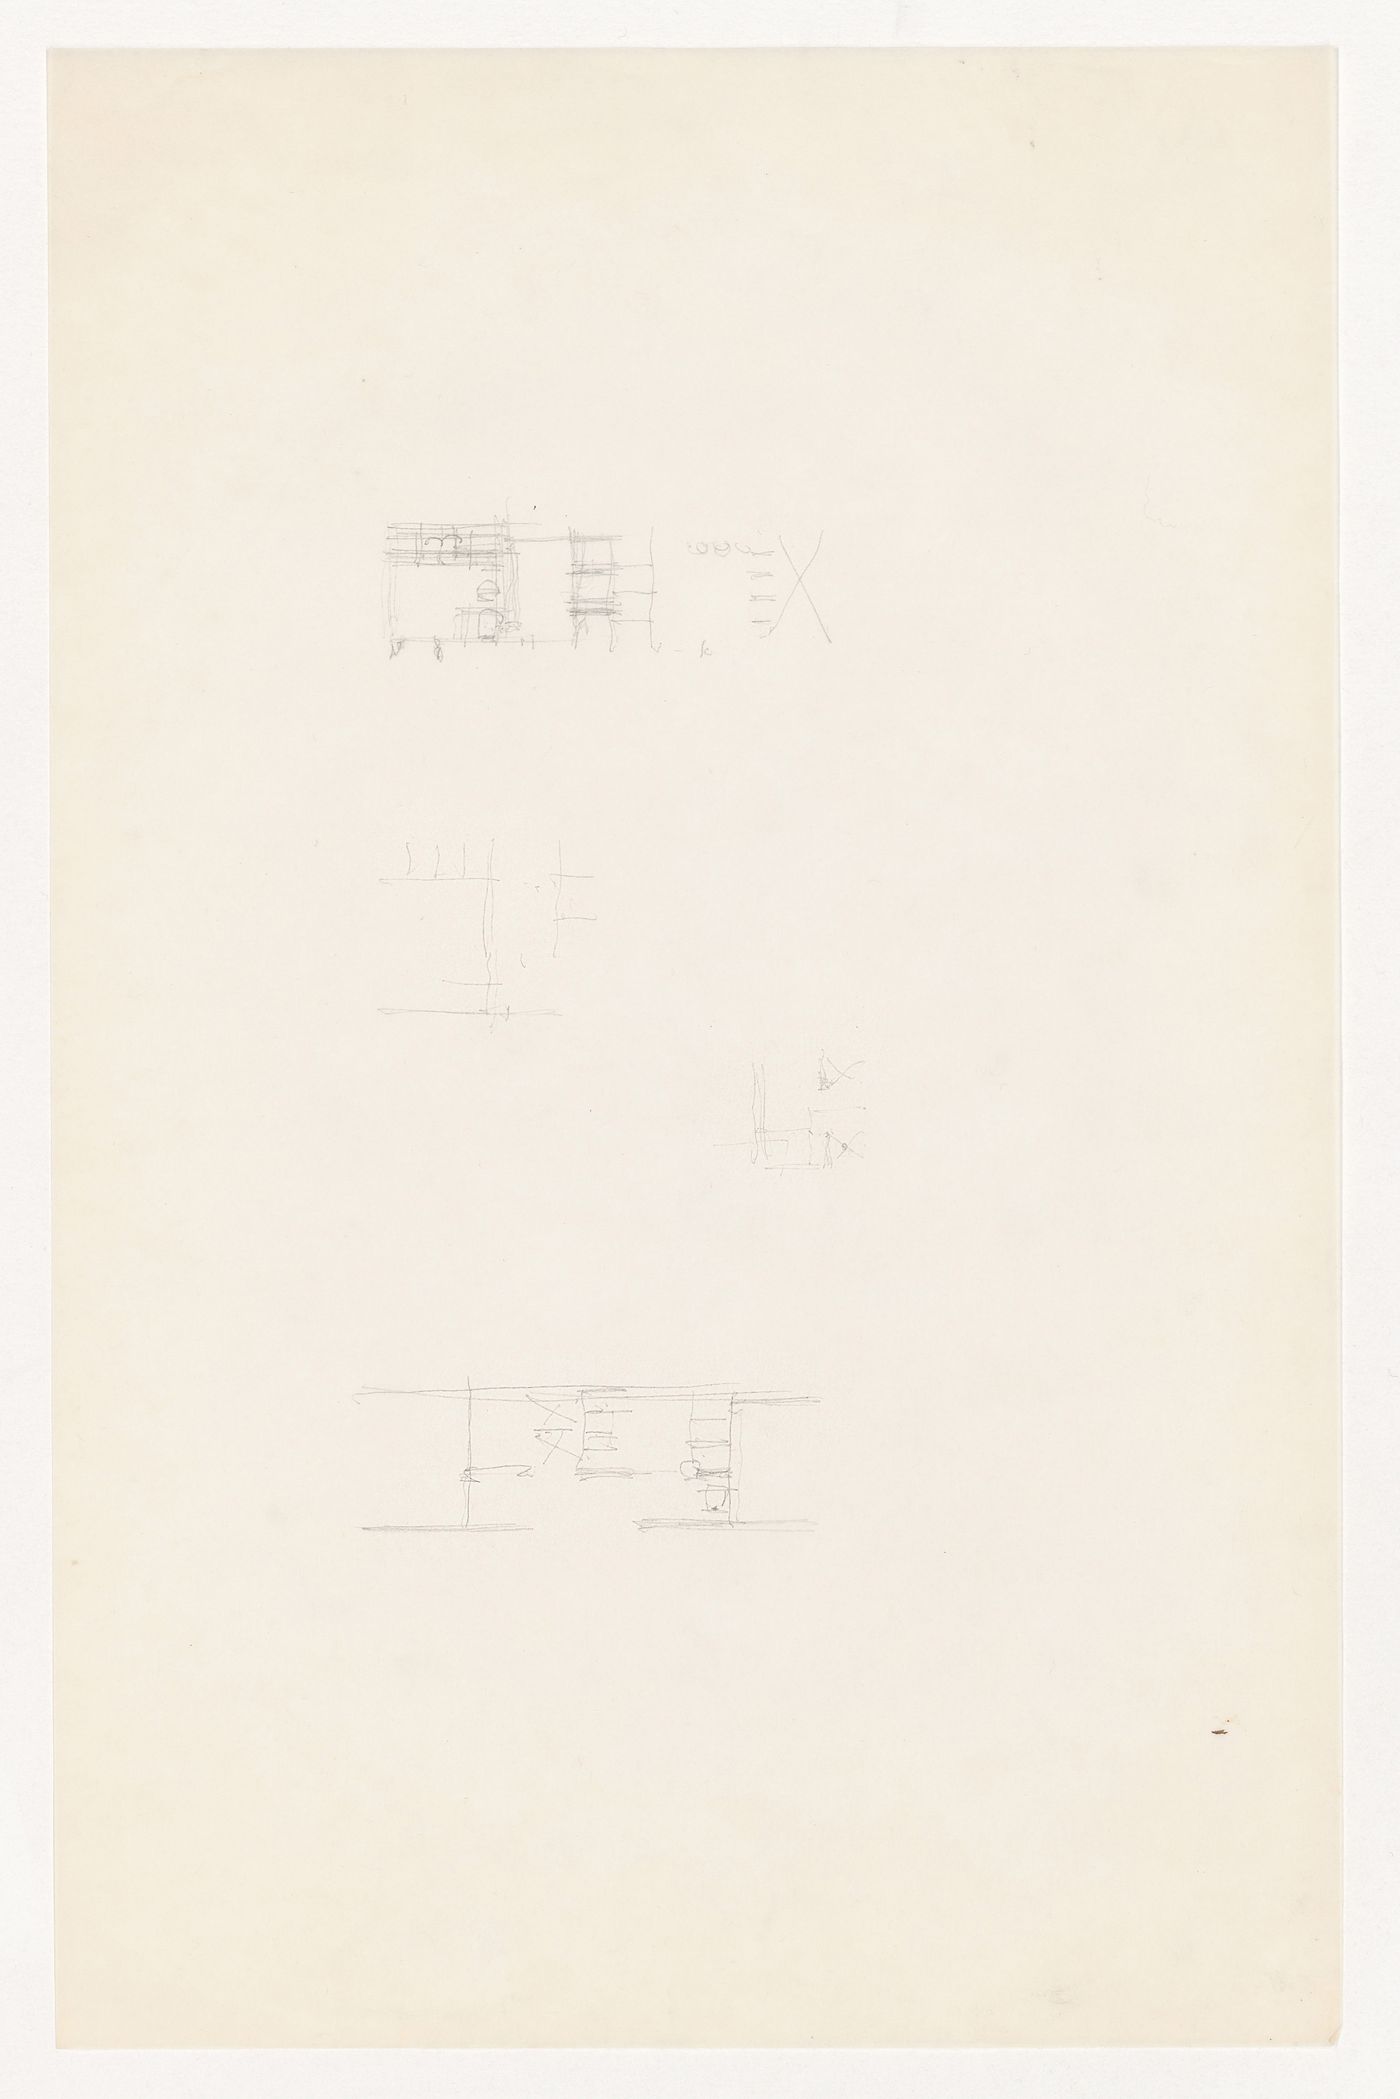 Unidentified sketch for the Metallurgy Building, Illinois Institute of Technology, Chicago